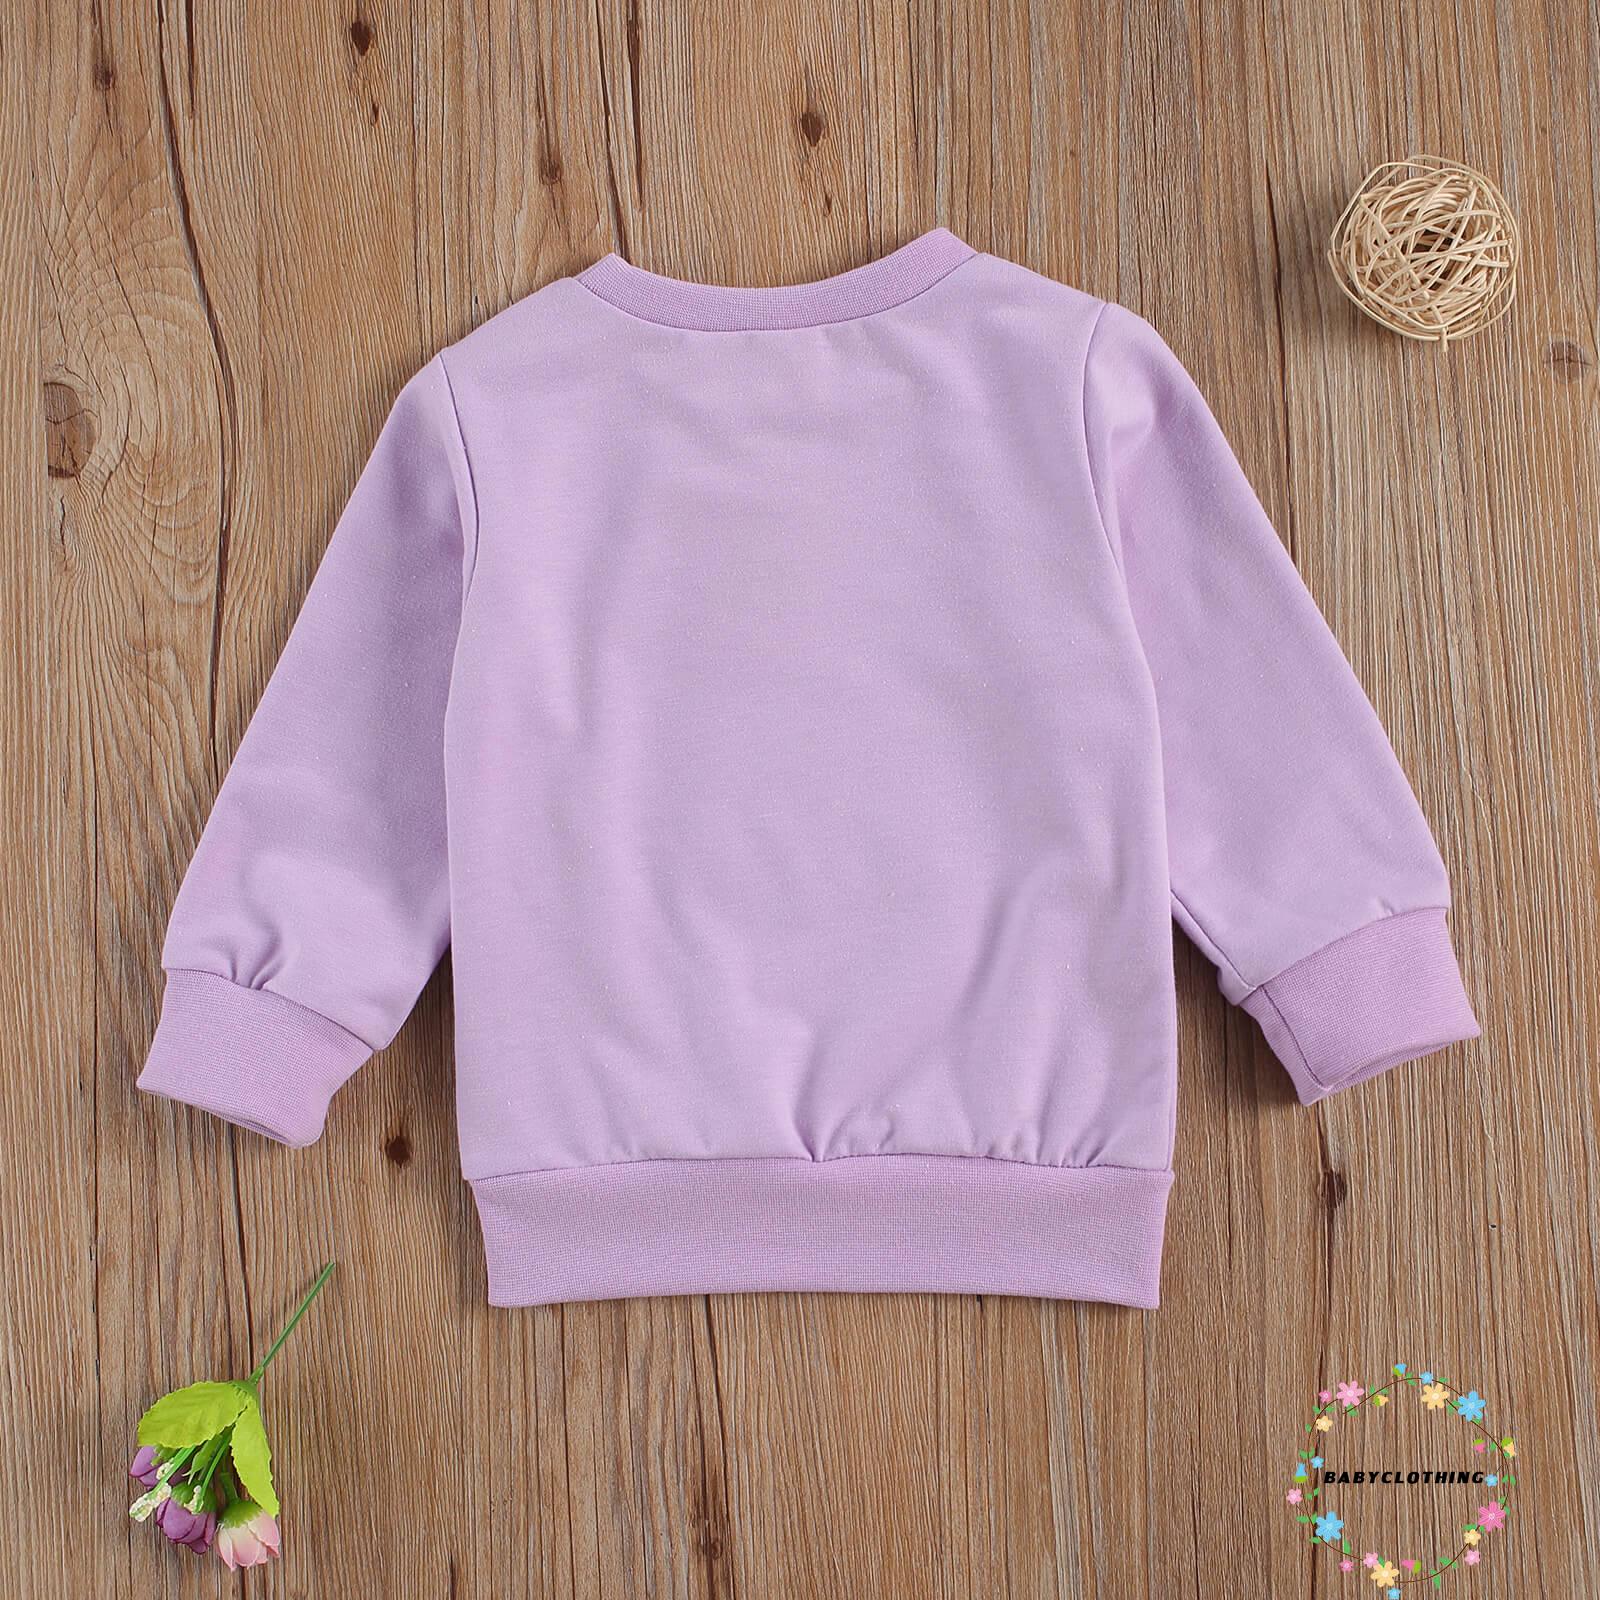 BBCQ-Kid Girl Floral Top, Fall Shirt, Round Neck Long-Sleeve Casual Elastic Cuff Hem Windproof Warm Blouse